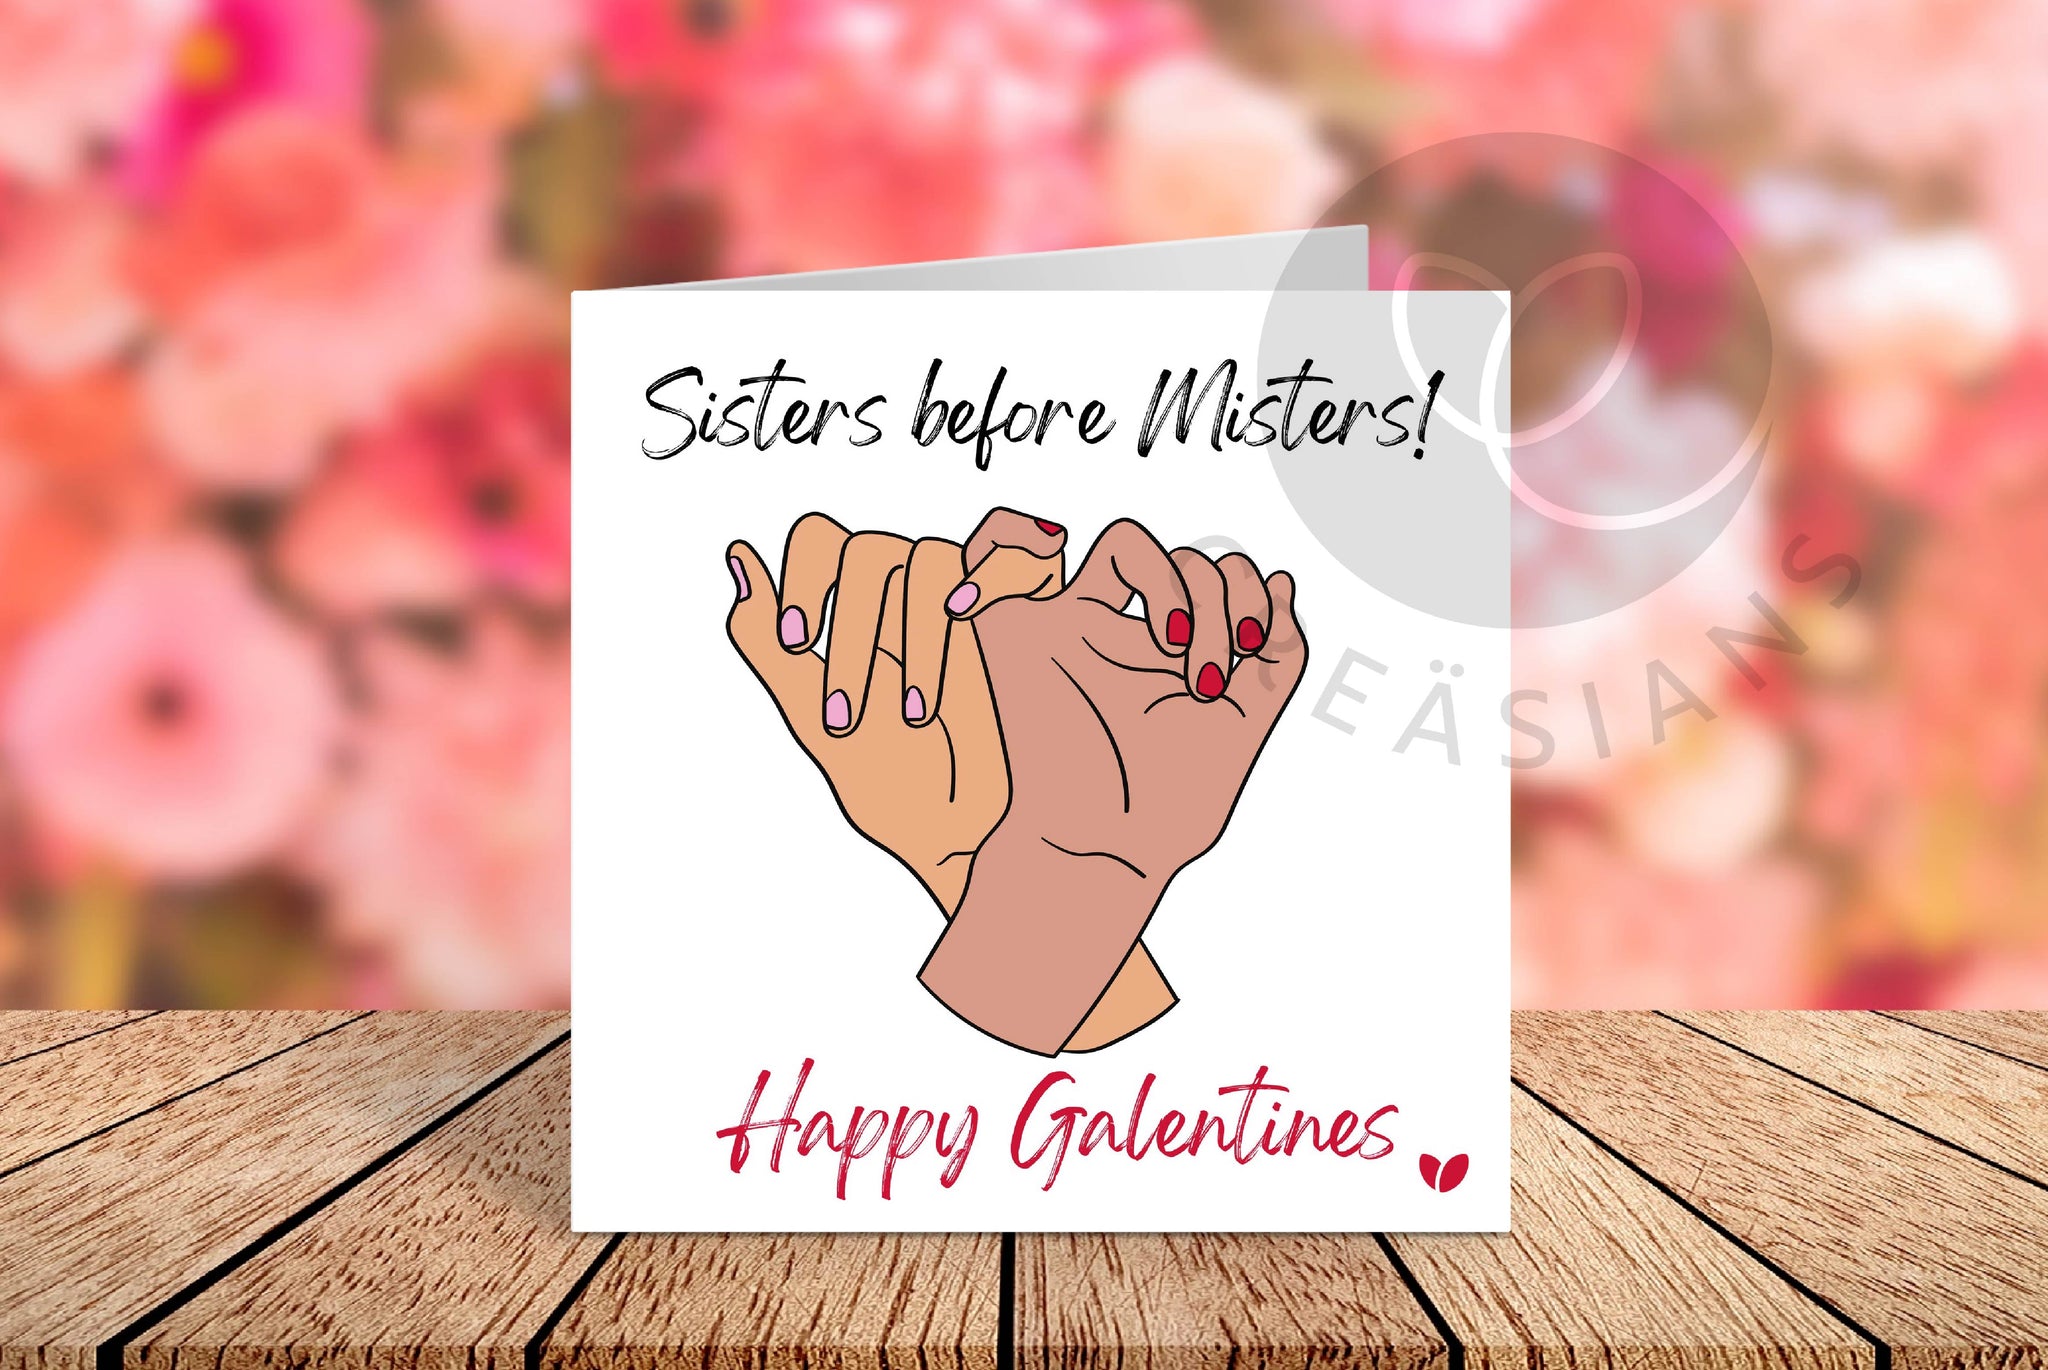 Sisters before Misters Galentines greeting card